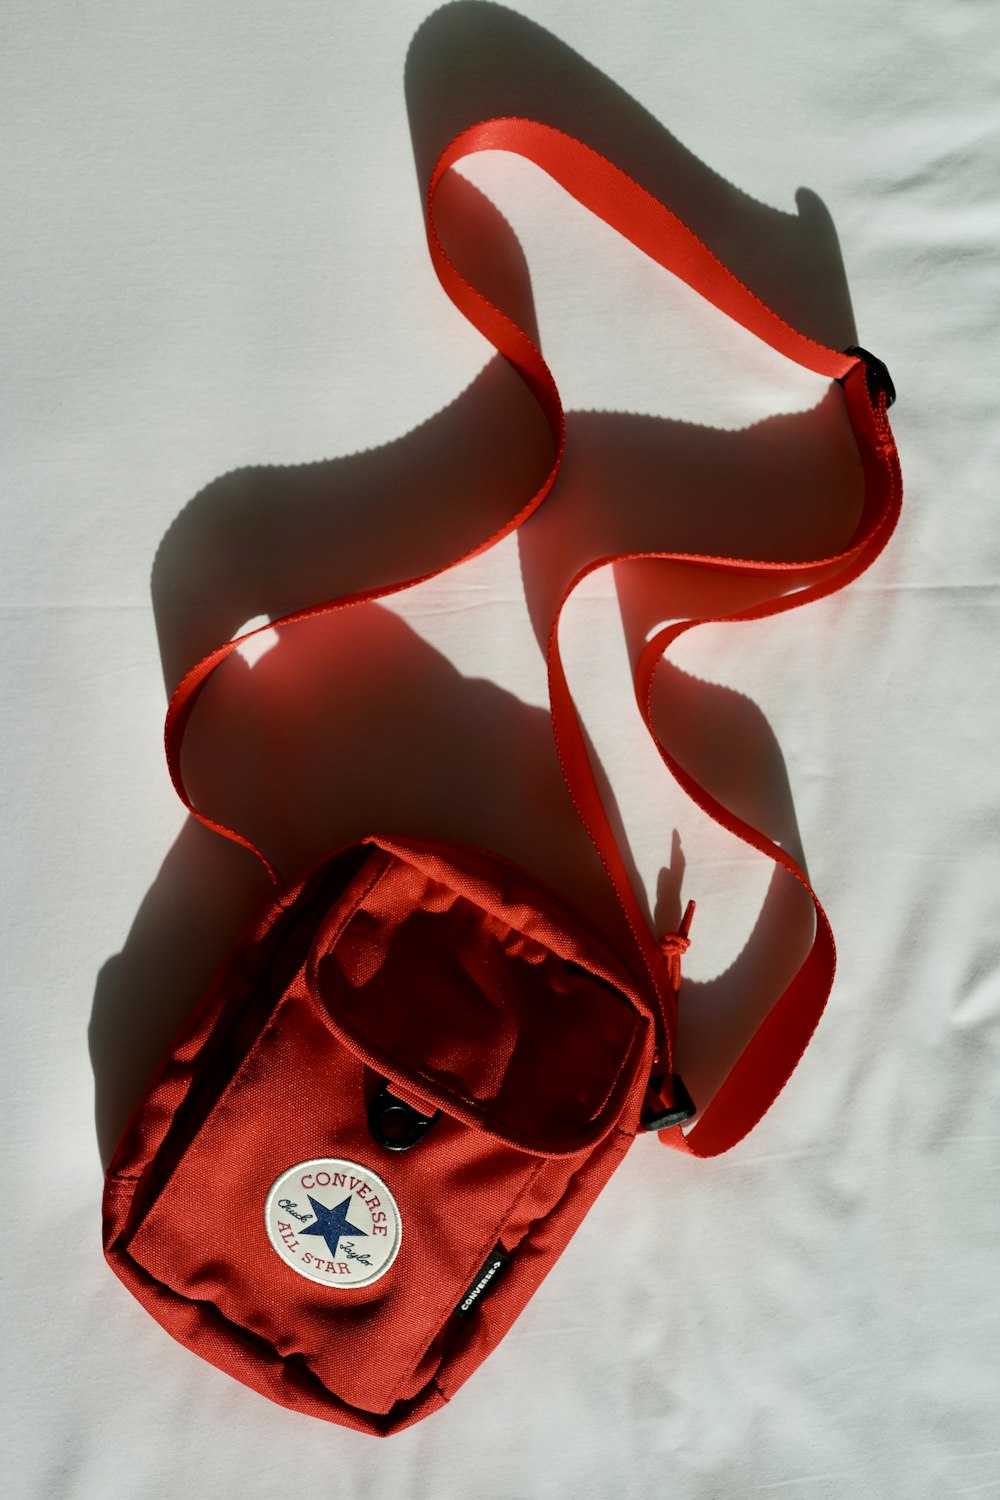 a red bag laying on top of a white sheet